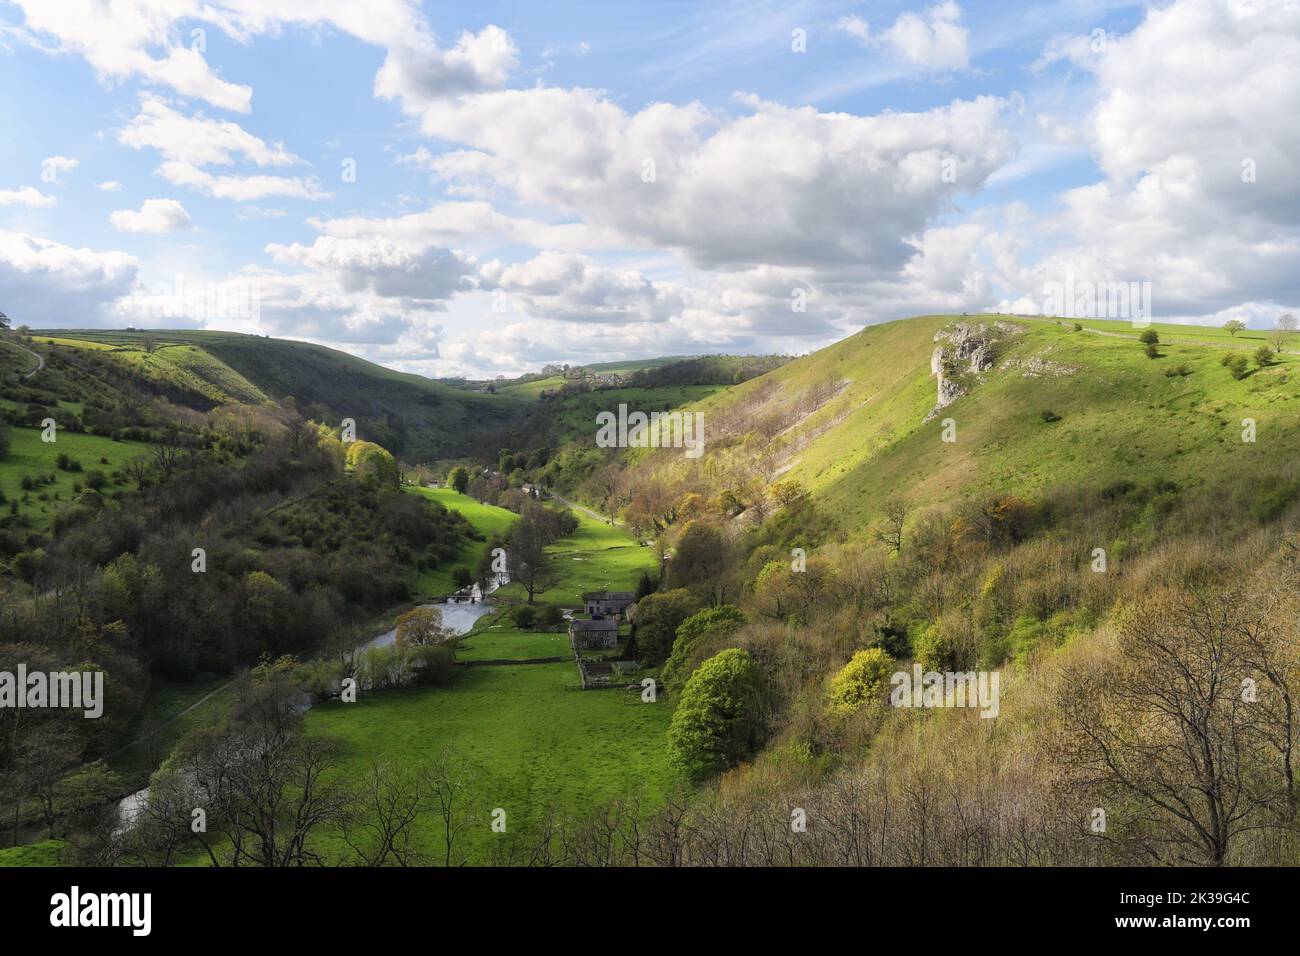 Scenic and picturesque Monsal Dale in the Peak District in Derbyshire, England UK. Rural British countryside Stock Photo